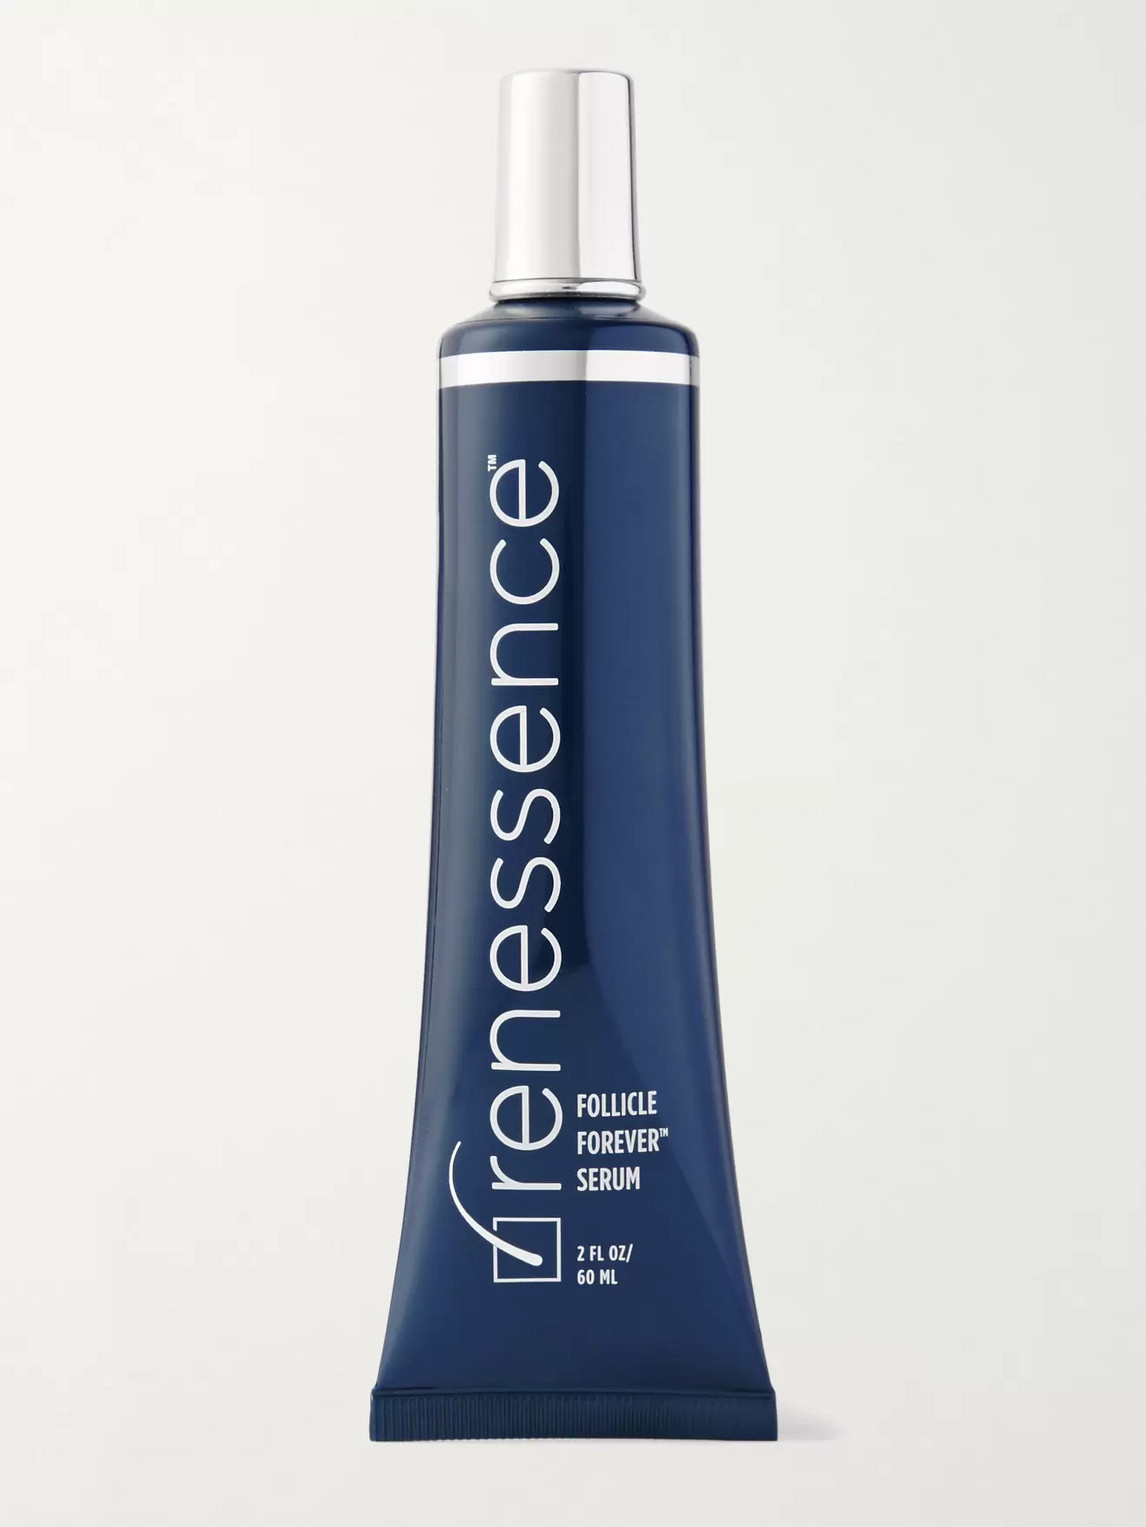 Renessence Follicle Forever Serum, 60ml In Colorless